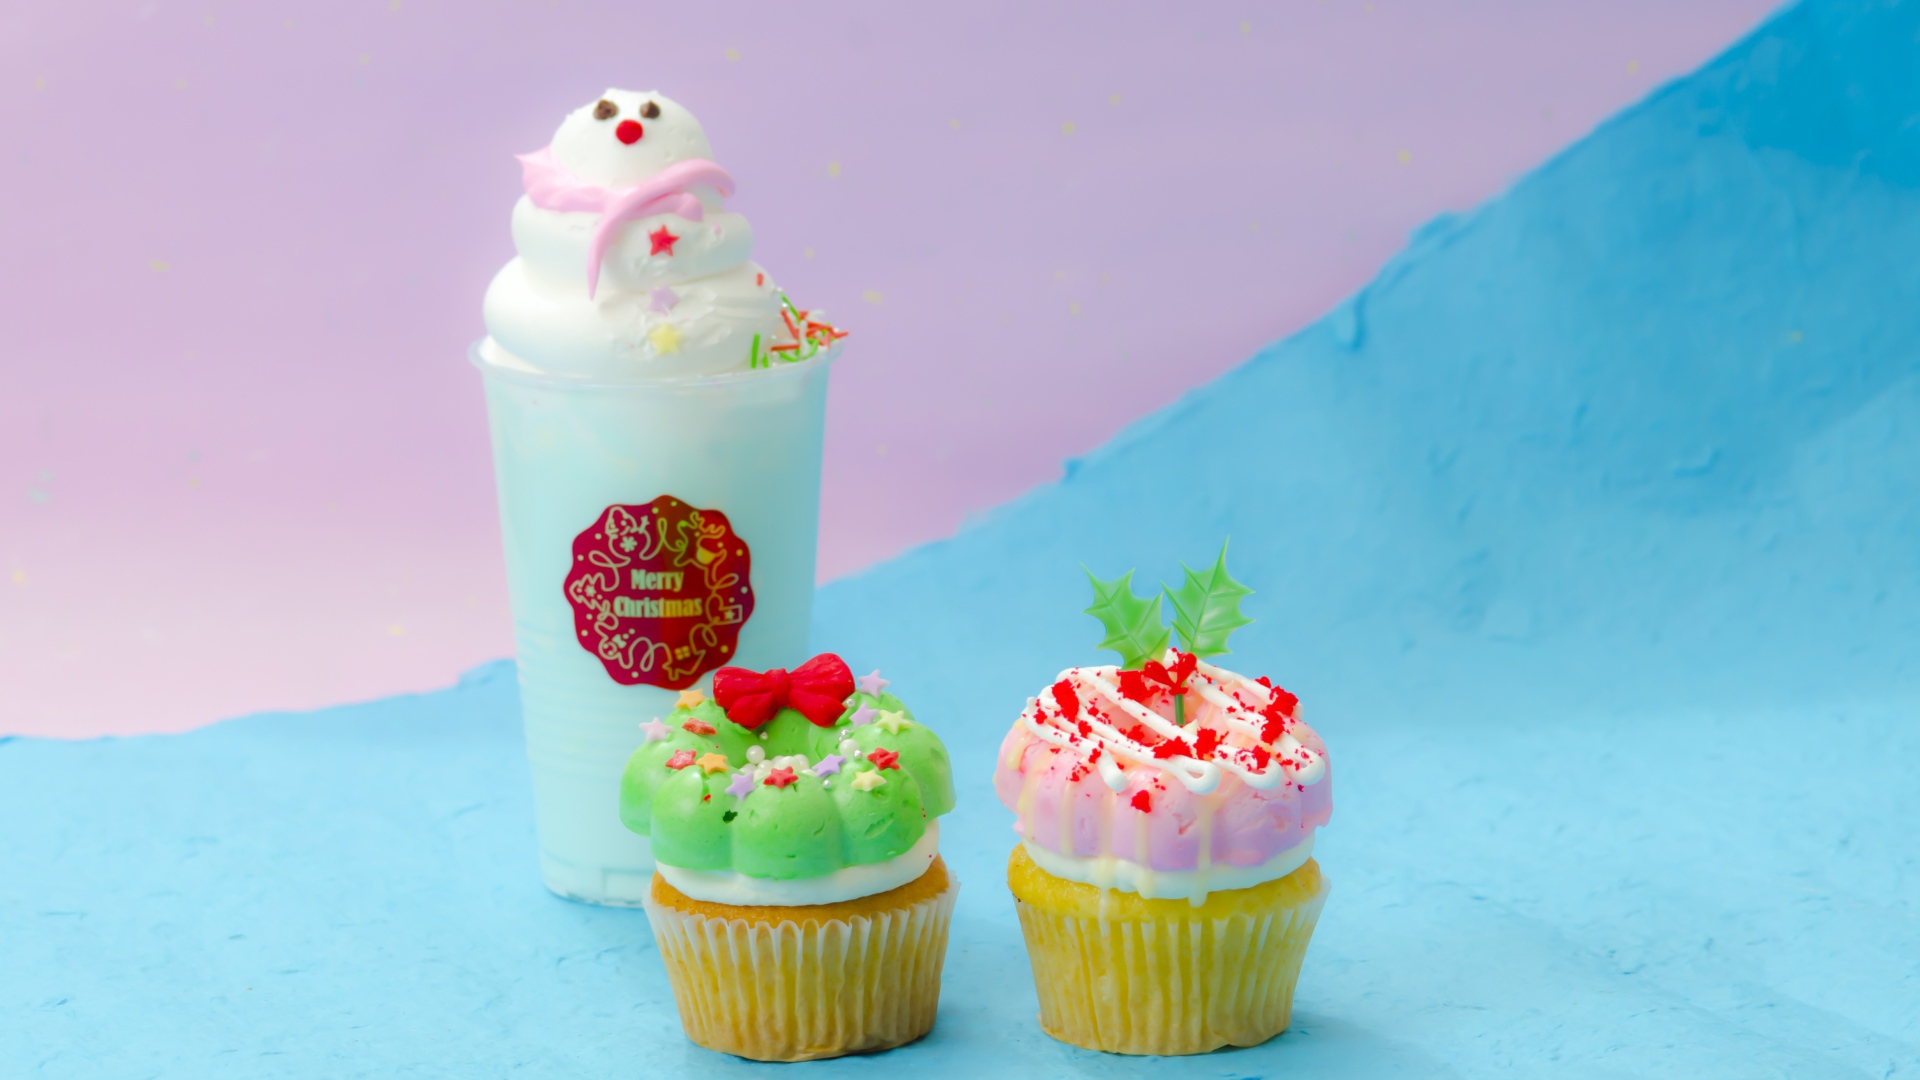 Two cupcakes and a cocktail on a bright background